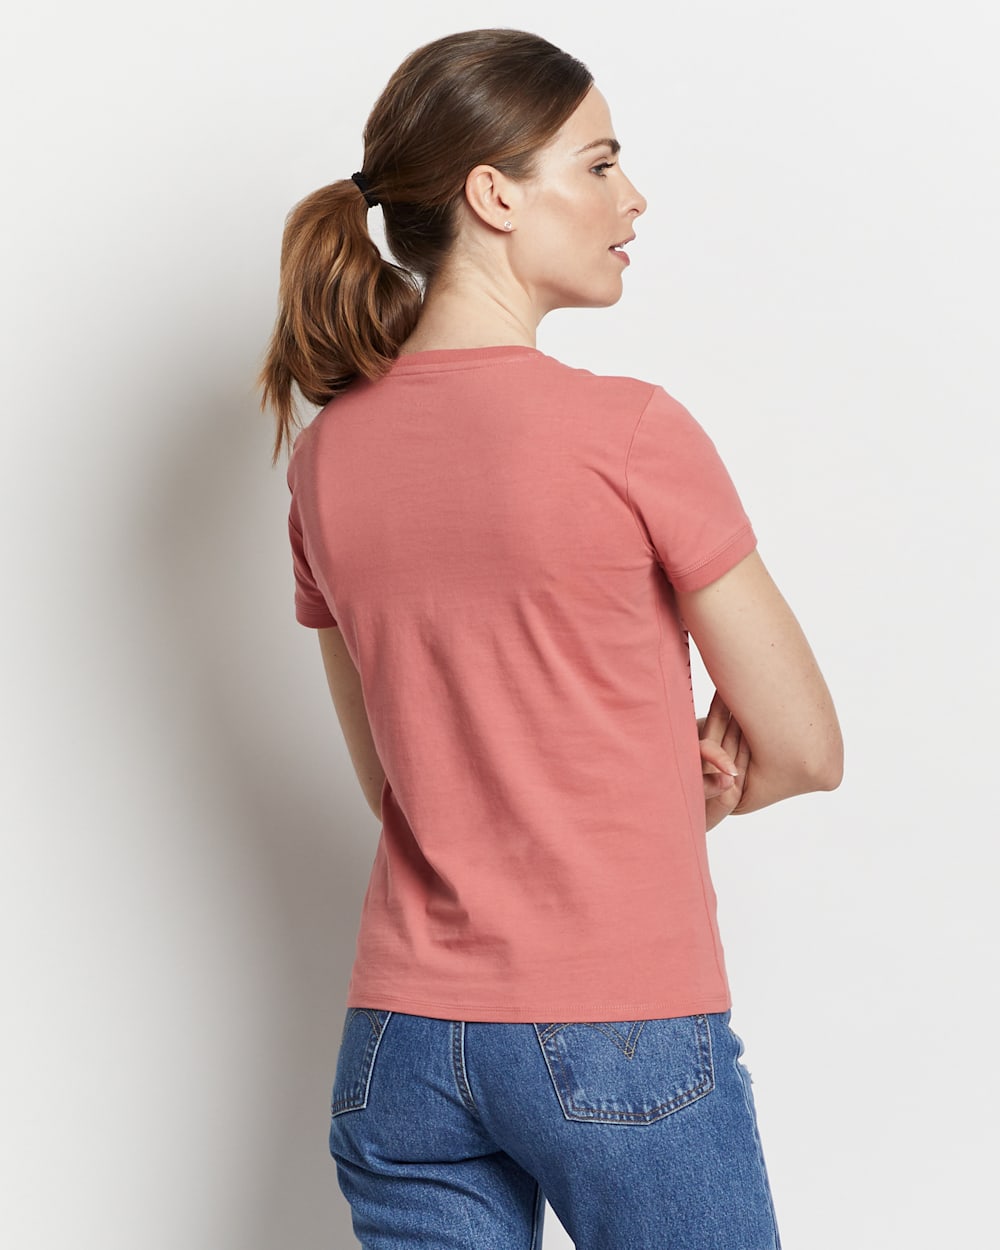 ALTERNATE VIEW OF WOMEN'S DESCHUTES GRAPHIC TEE IN FADED ROSE CHIEF JOSEPH image number 4